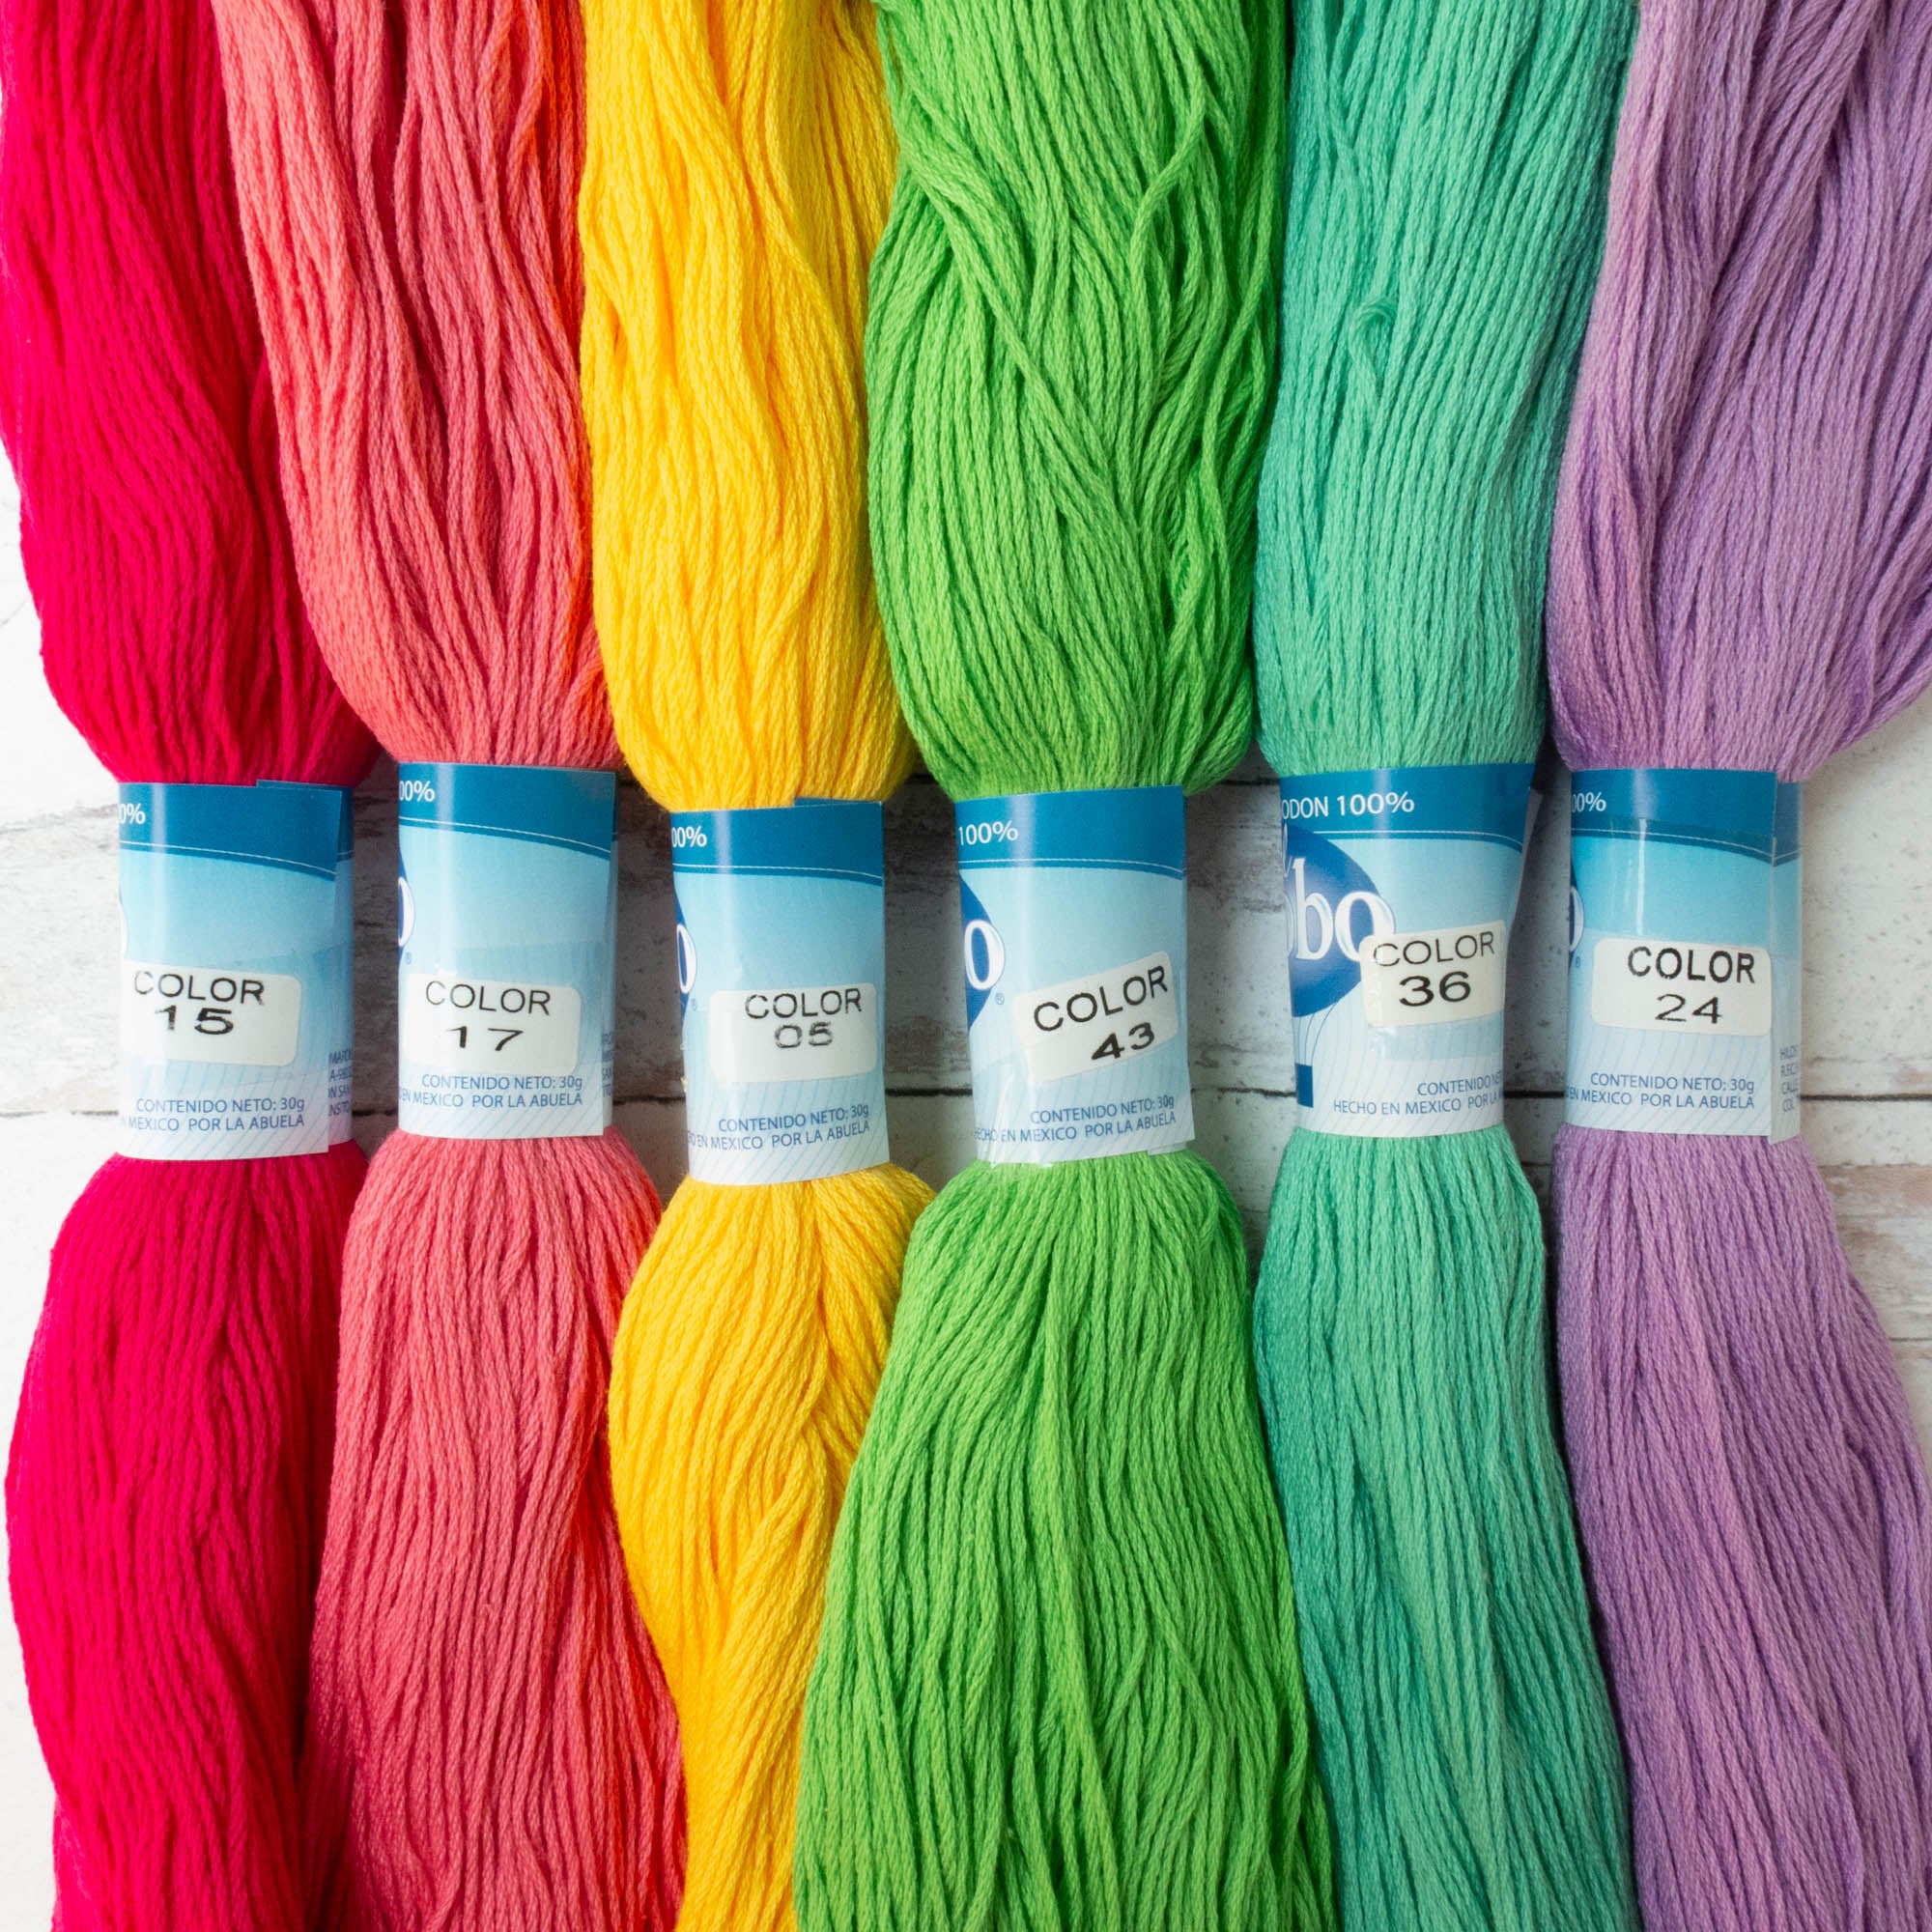 Only 16.25 usd for Hilo Vela El Globo Embroidery Thread Set